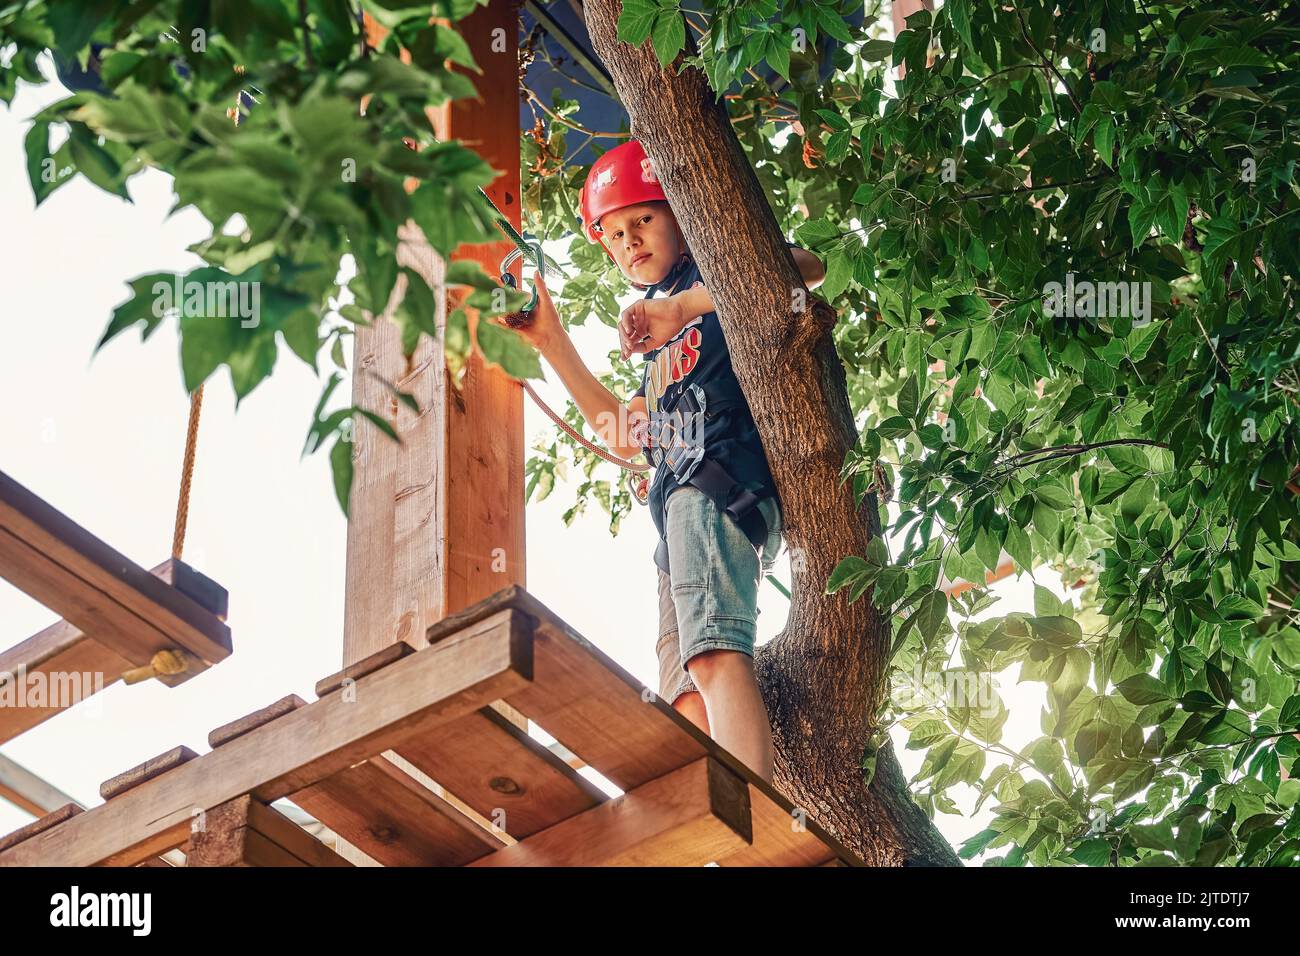 Boy in a helmet and climbing equipment standing on a wooden platform against foliage background, spending time in rope park in summer evening Stock Photo